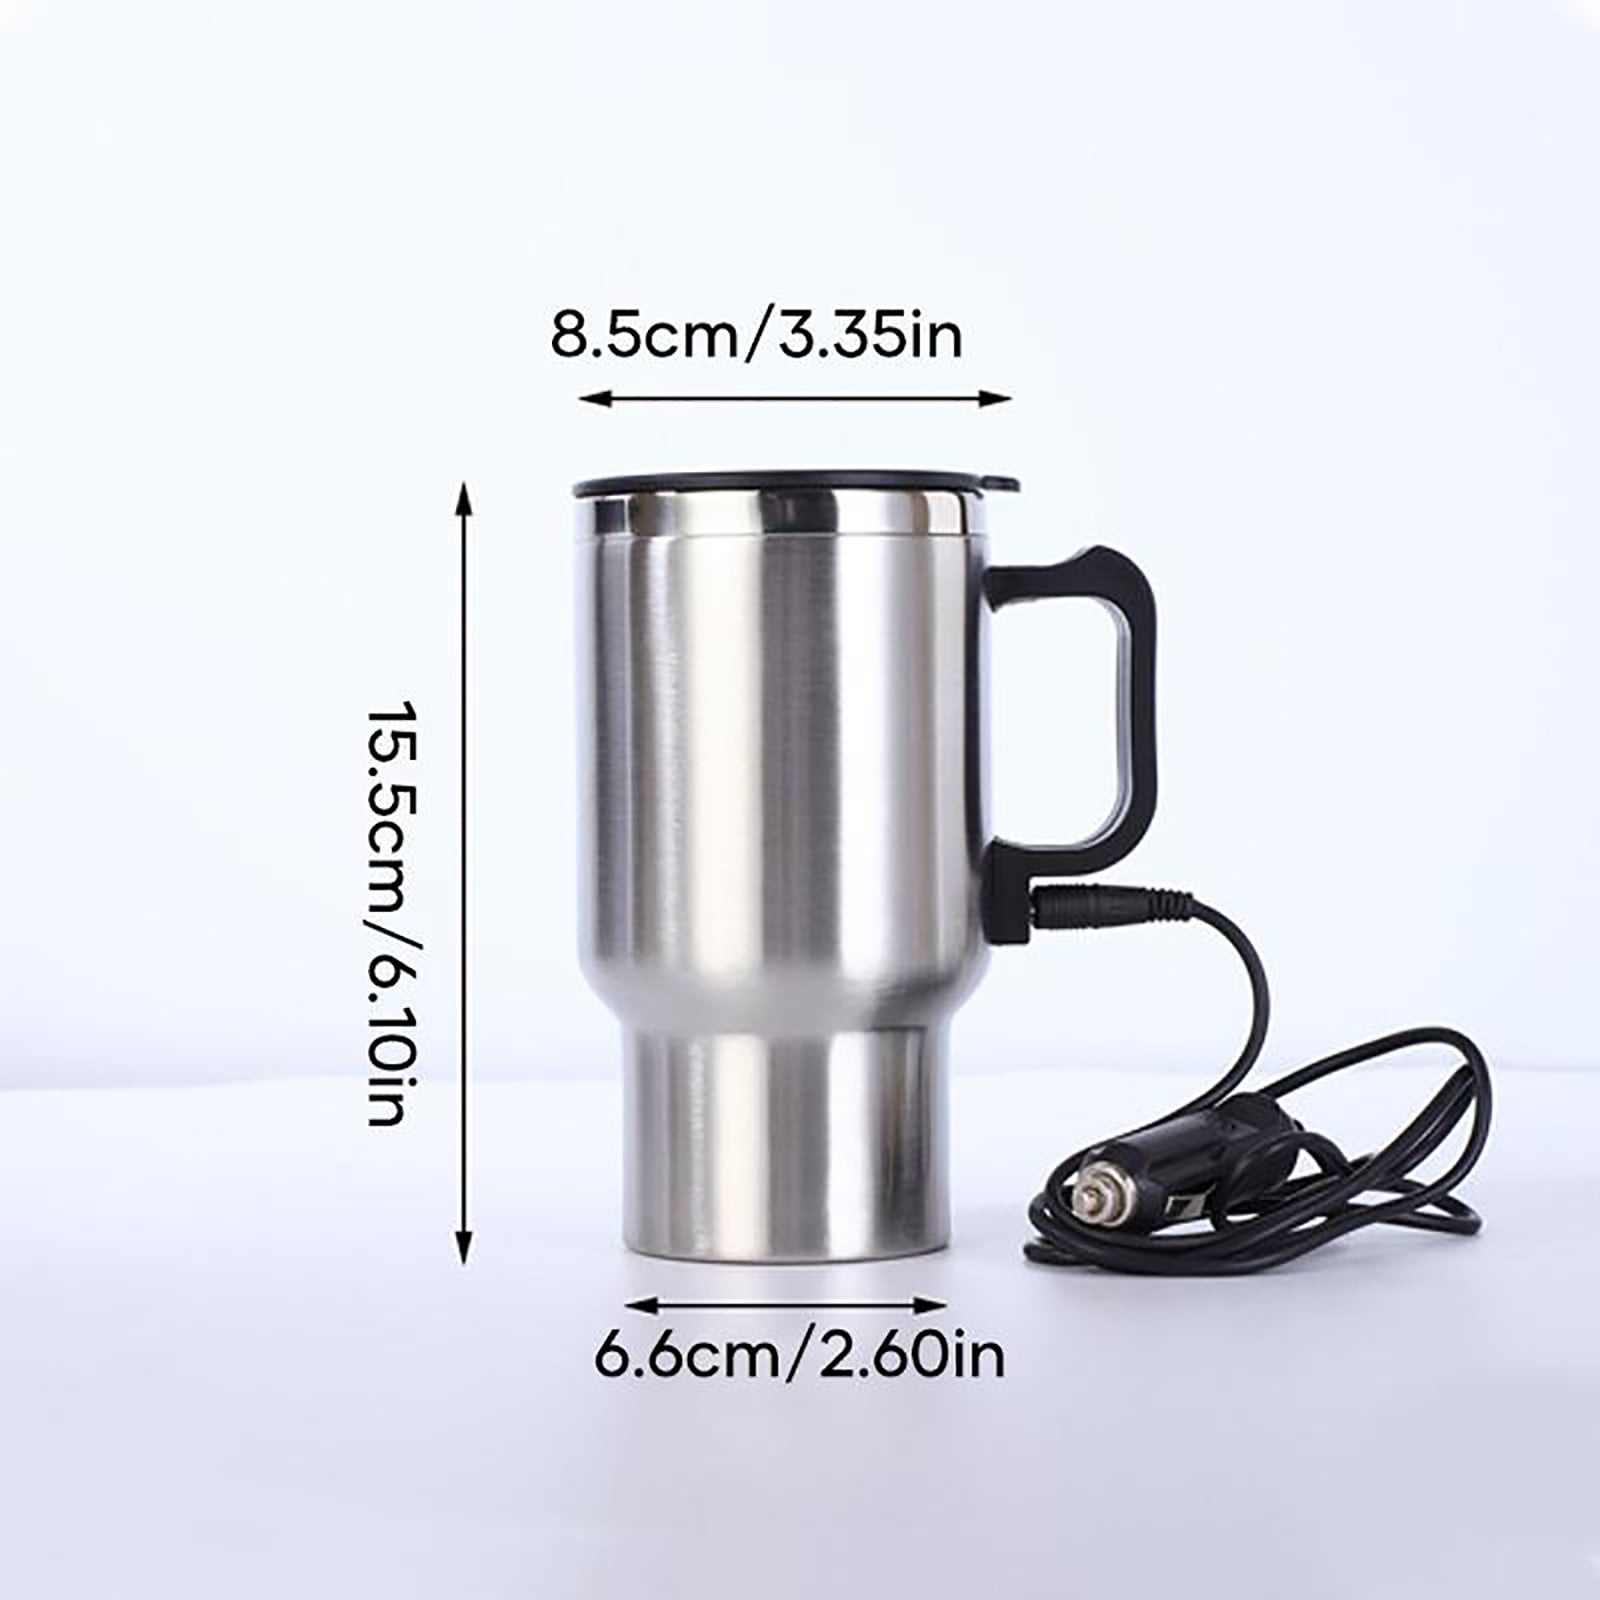 Jikolililili Heated Travel Mug 16 Oz 12V Stainless Steel Electric Car  Kettle Boiler Portable in-car Heating Cup Coffee Tea Warmer Cup Thermoses  Powered by 12V Cigarette Lighter Plug 